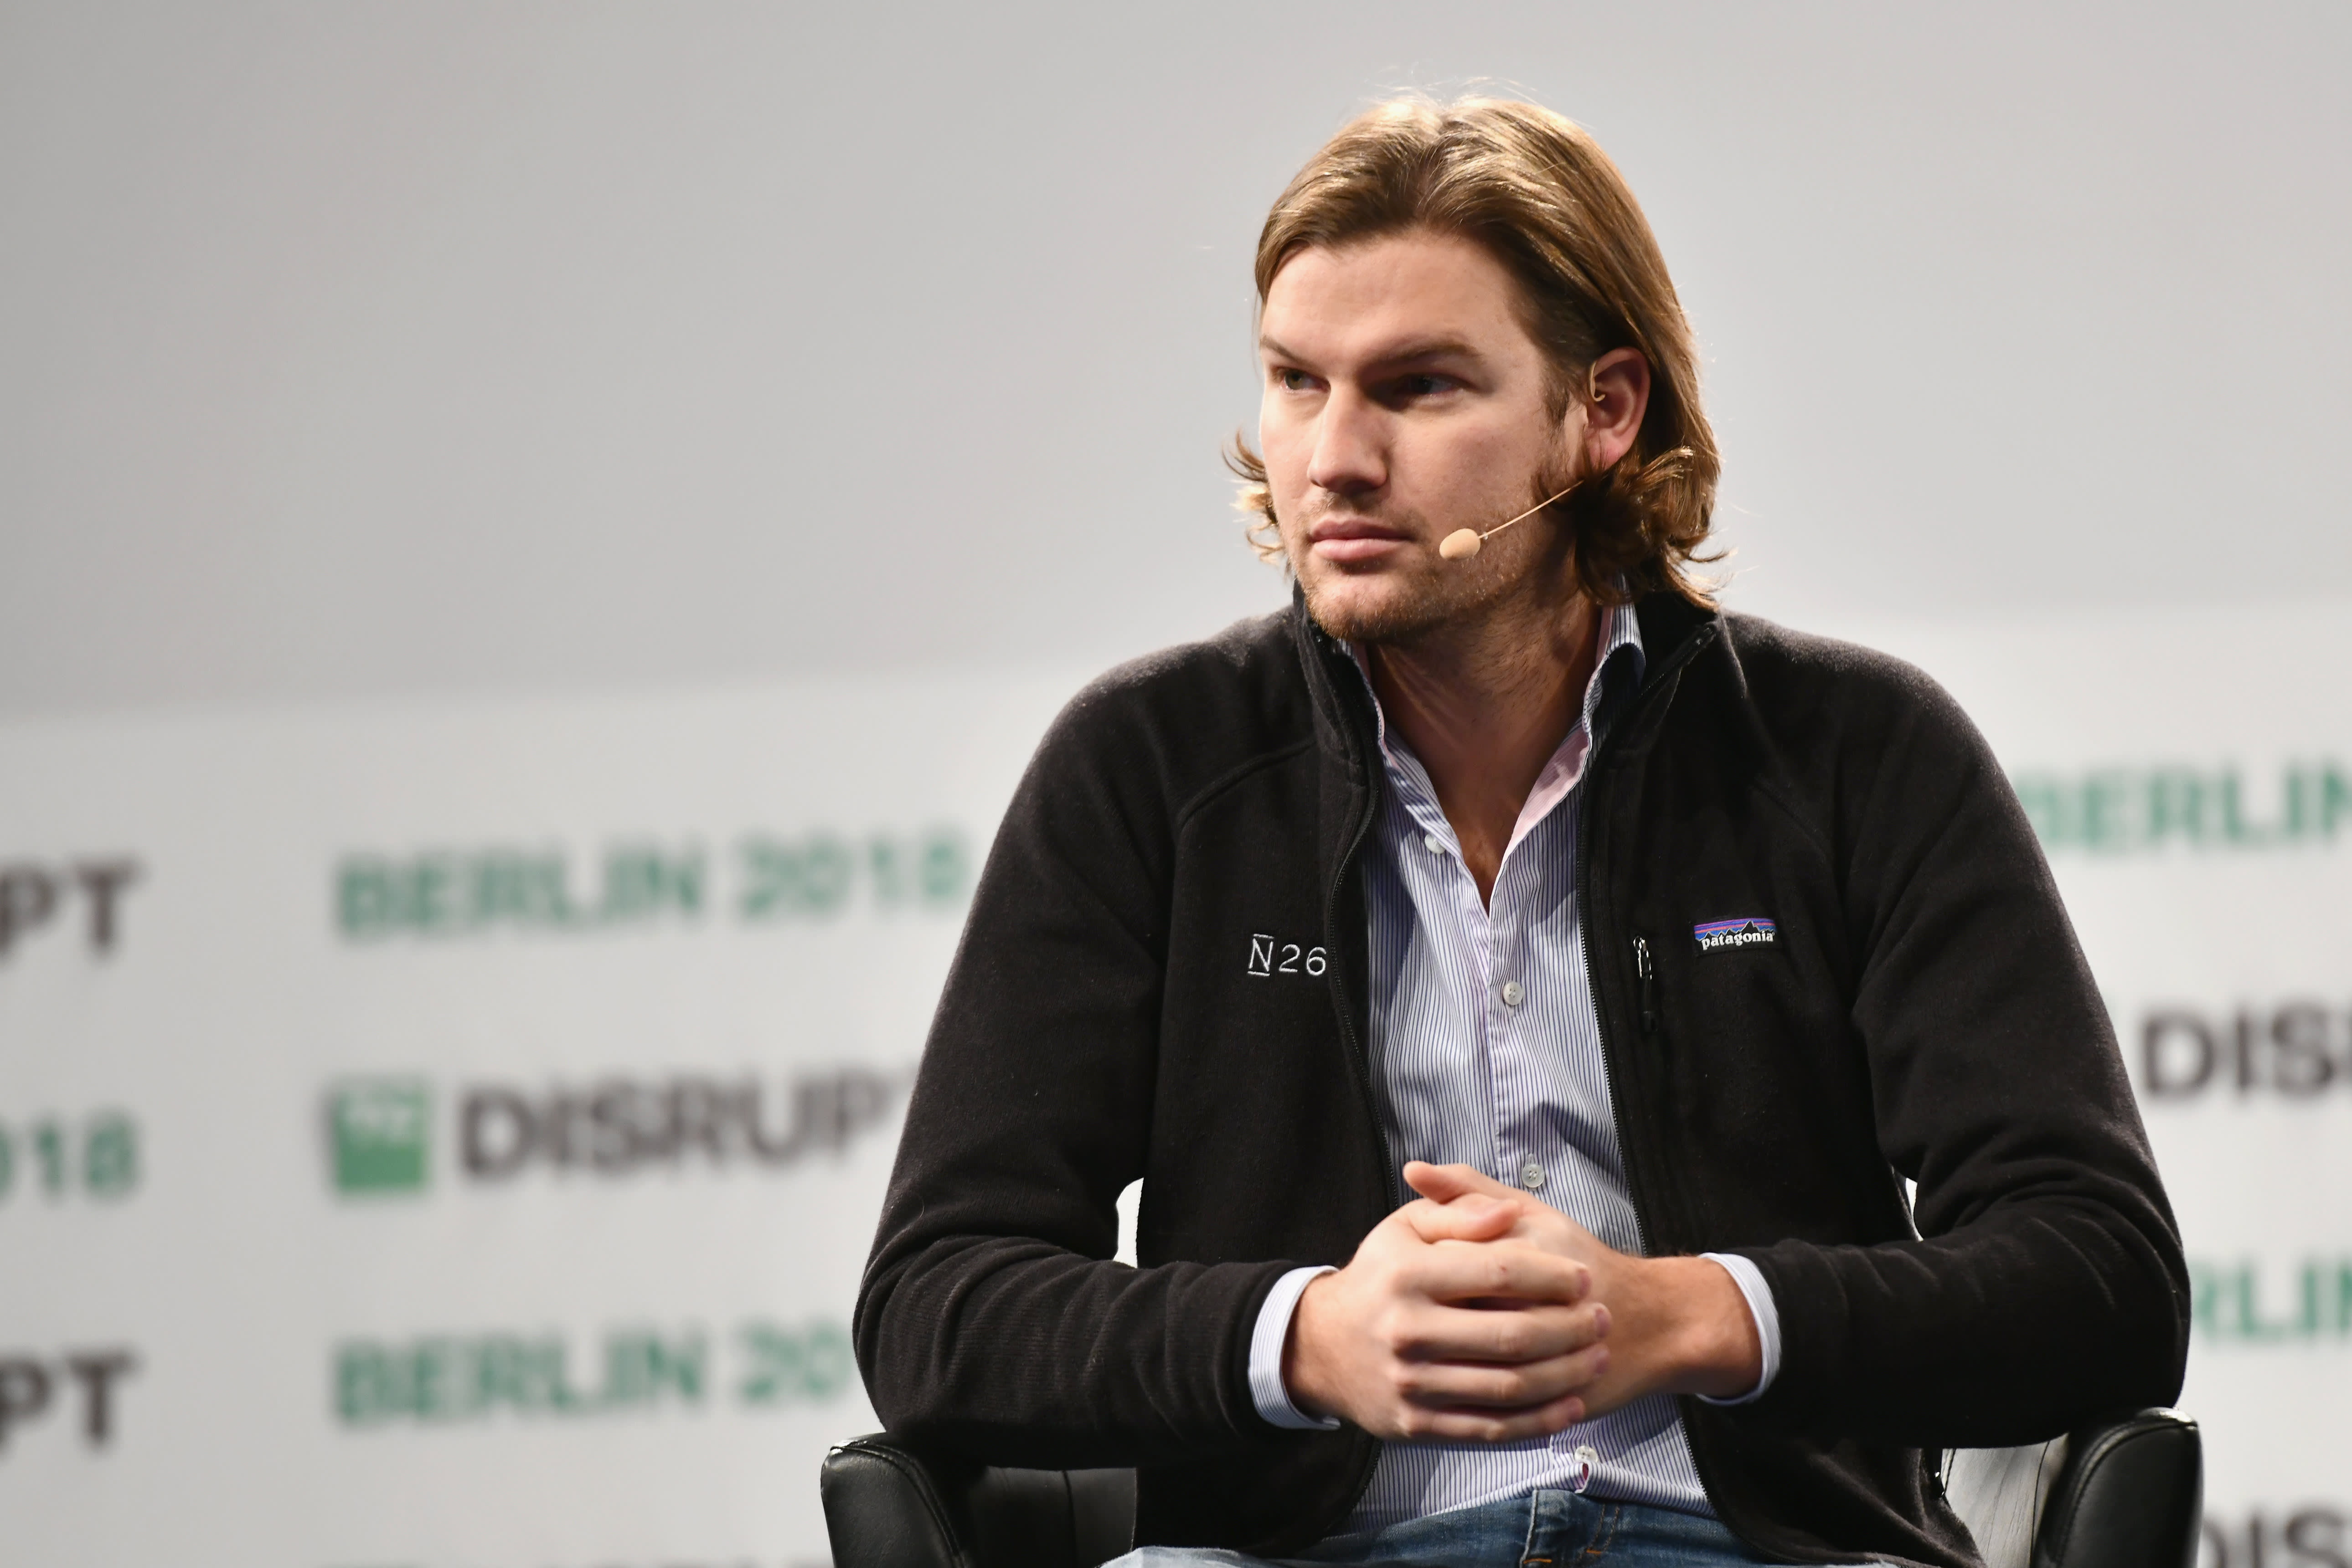 Germany's $9 billion digital bank N26 to withdraw from the U.S.